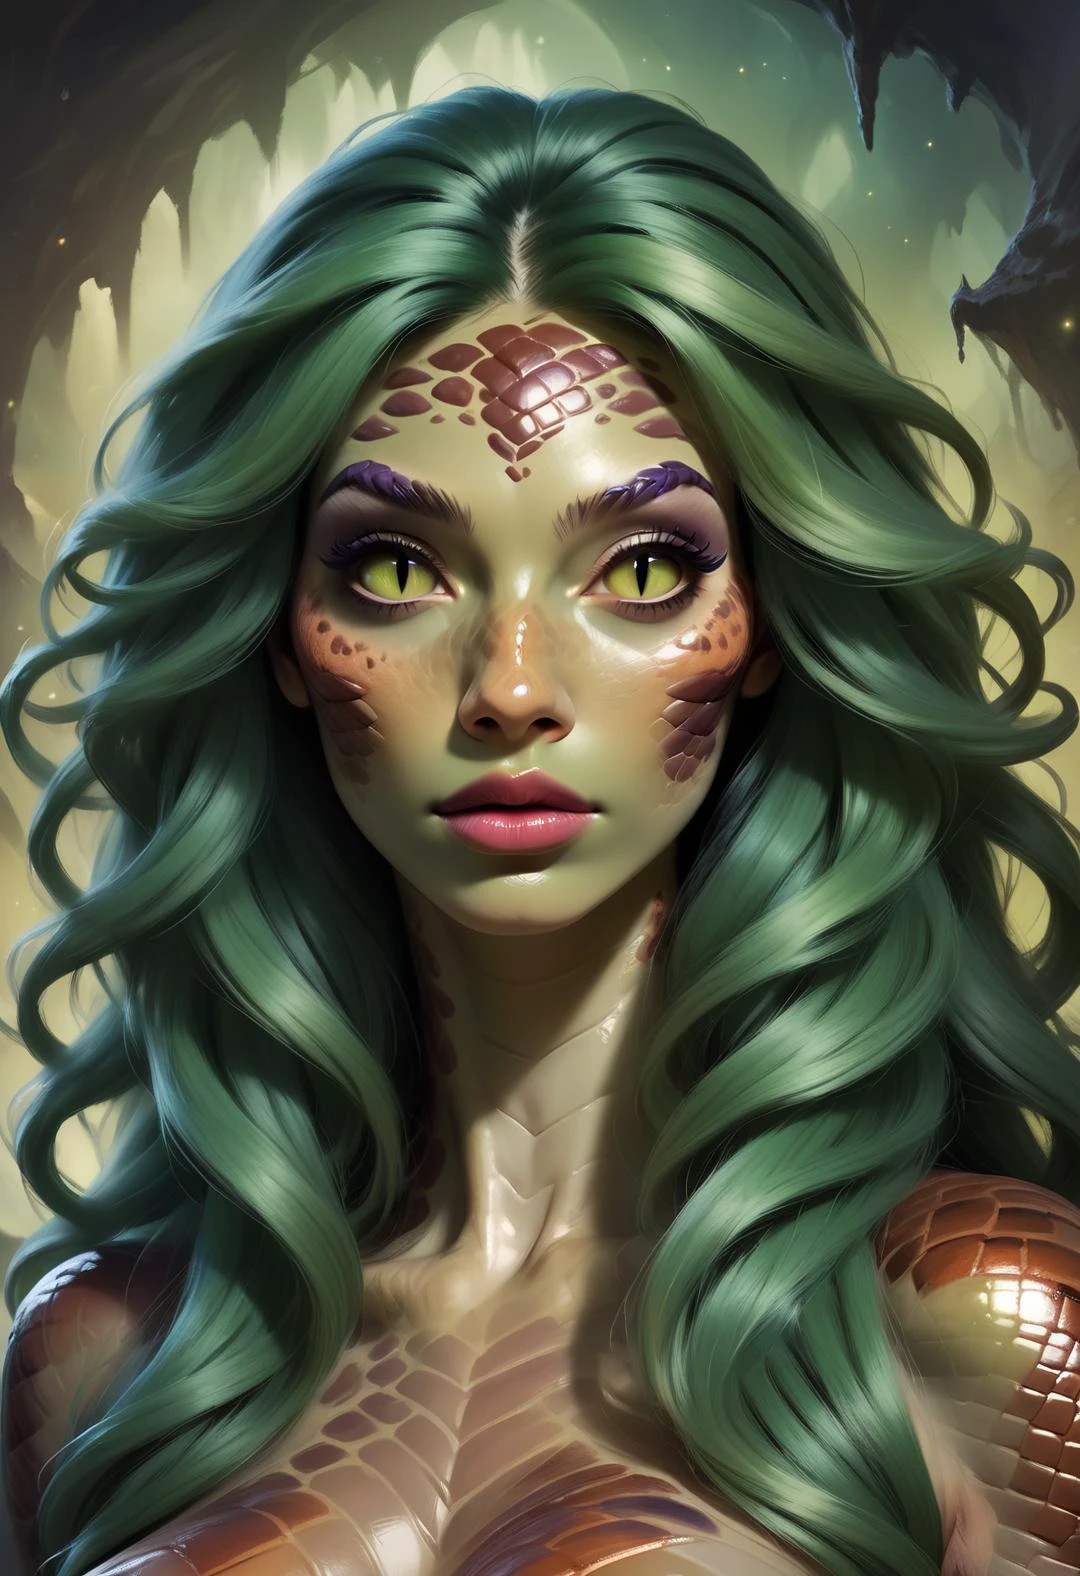 score_9, score_8_up, score_7_up, score_6_up, score_5_up, score_4_up, 1girl, naga woman, snake woman, green hair, slit pupils,  beautiful eyes, dungeons and dragons, portrait, up close, freckles, long hair, realistic, high quality, detailed, fantasy dark cave background